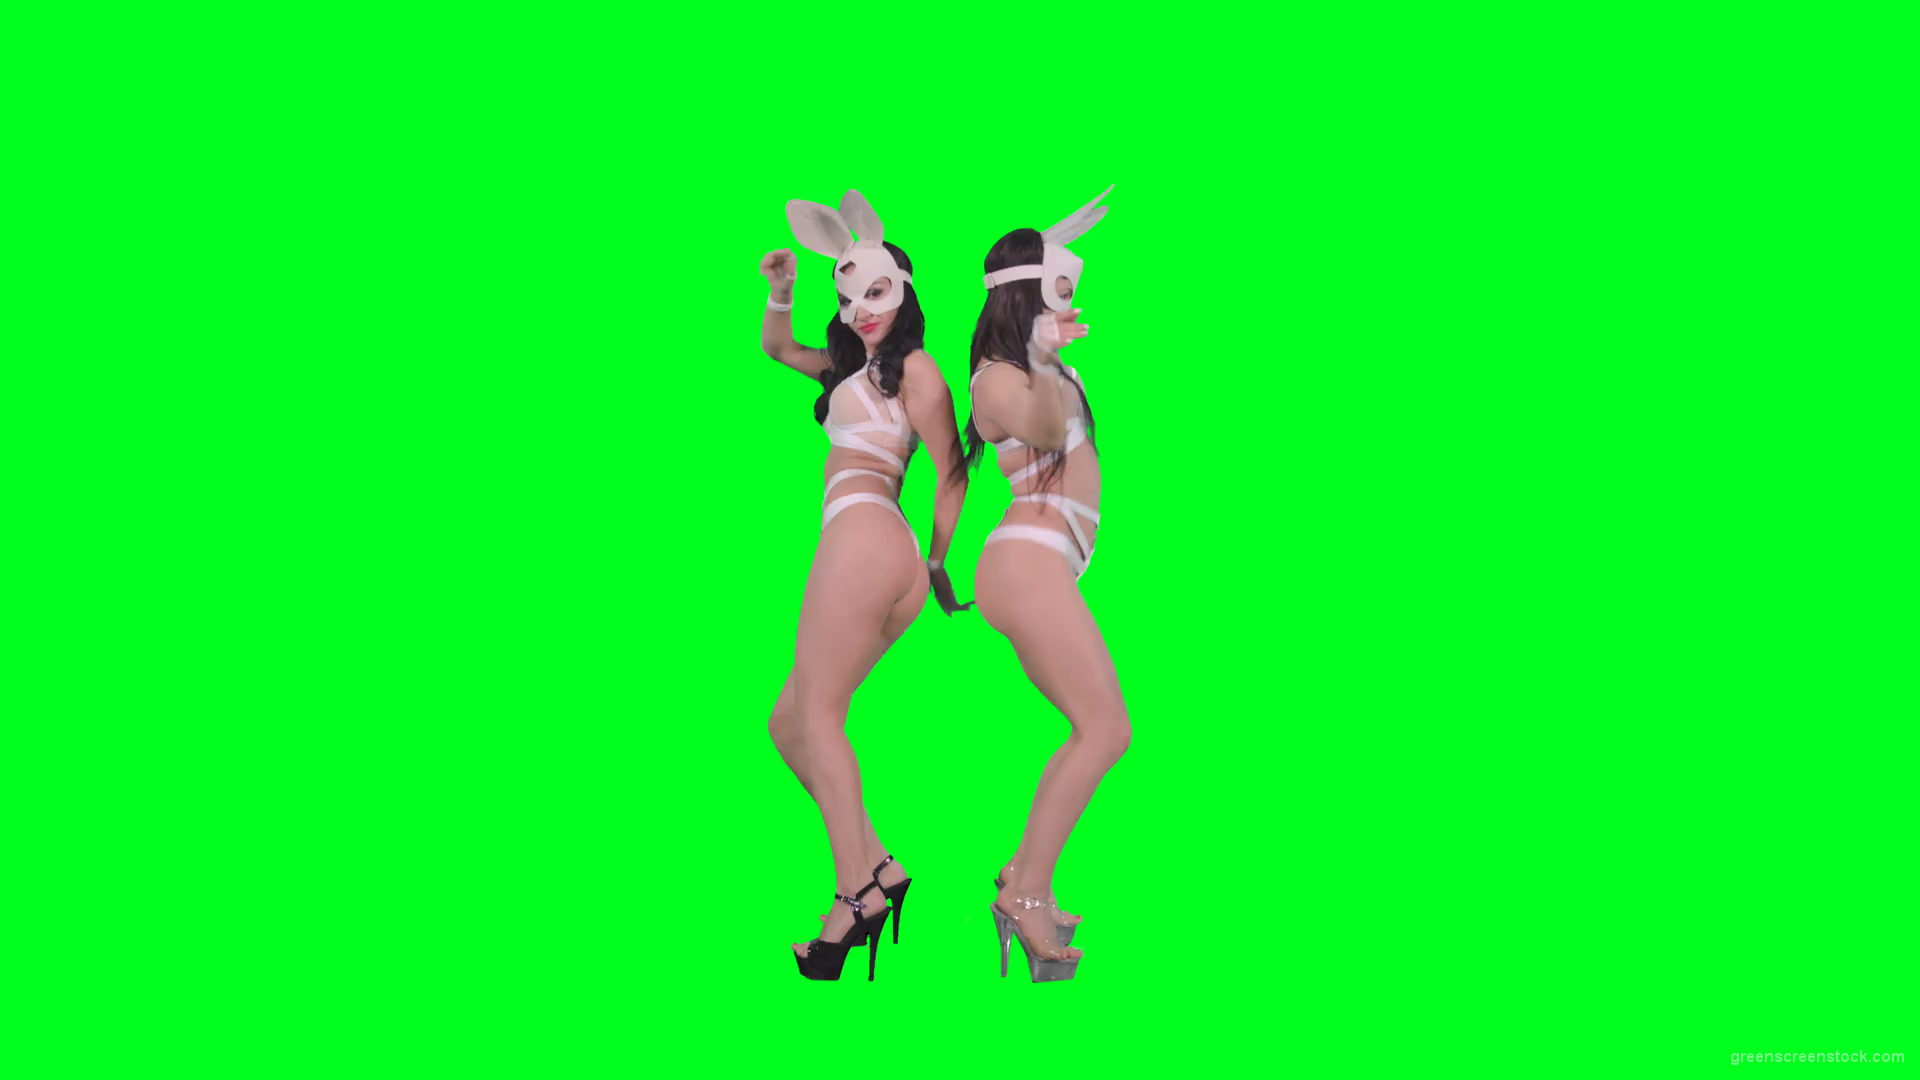 Go-Go-Dancing-female-team-duet-making-erotic-moves-on-green-screen-4K-Video-Footage-1920_001 Green Screen Stock